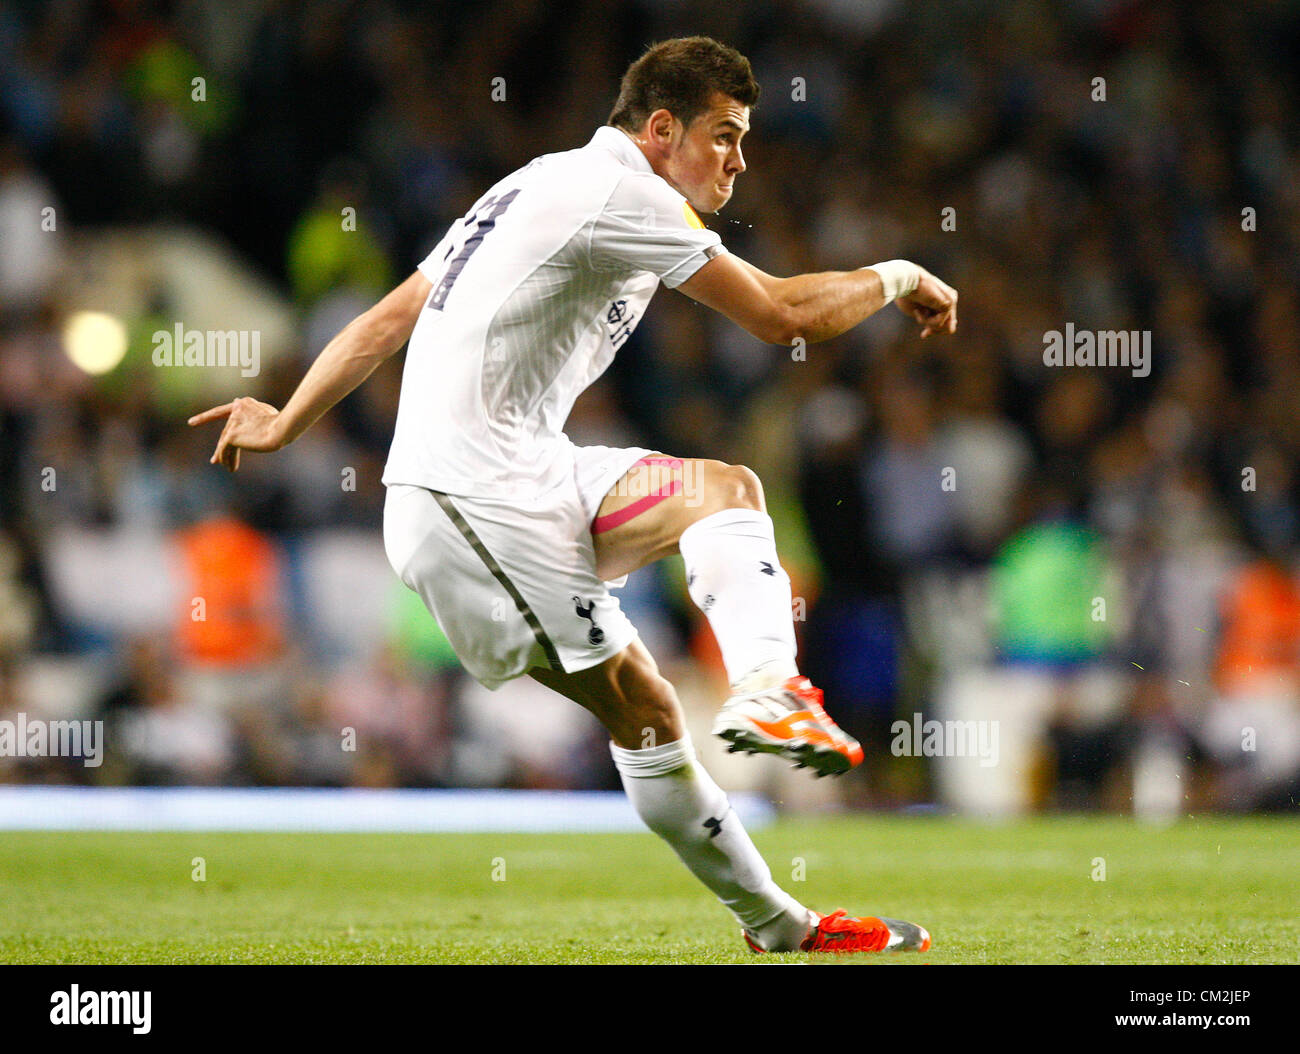 20.09.2012 London, ENGLAND:  Gareth Bale of Tottenham Hotspur in action during the Europa League Group J match between Tottenham Hotspur and SS Lazio at White Hart Lane Stadium Stock Photo